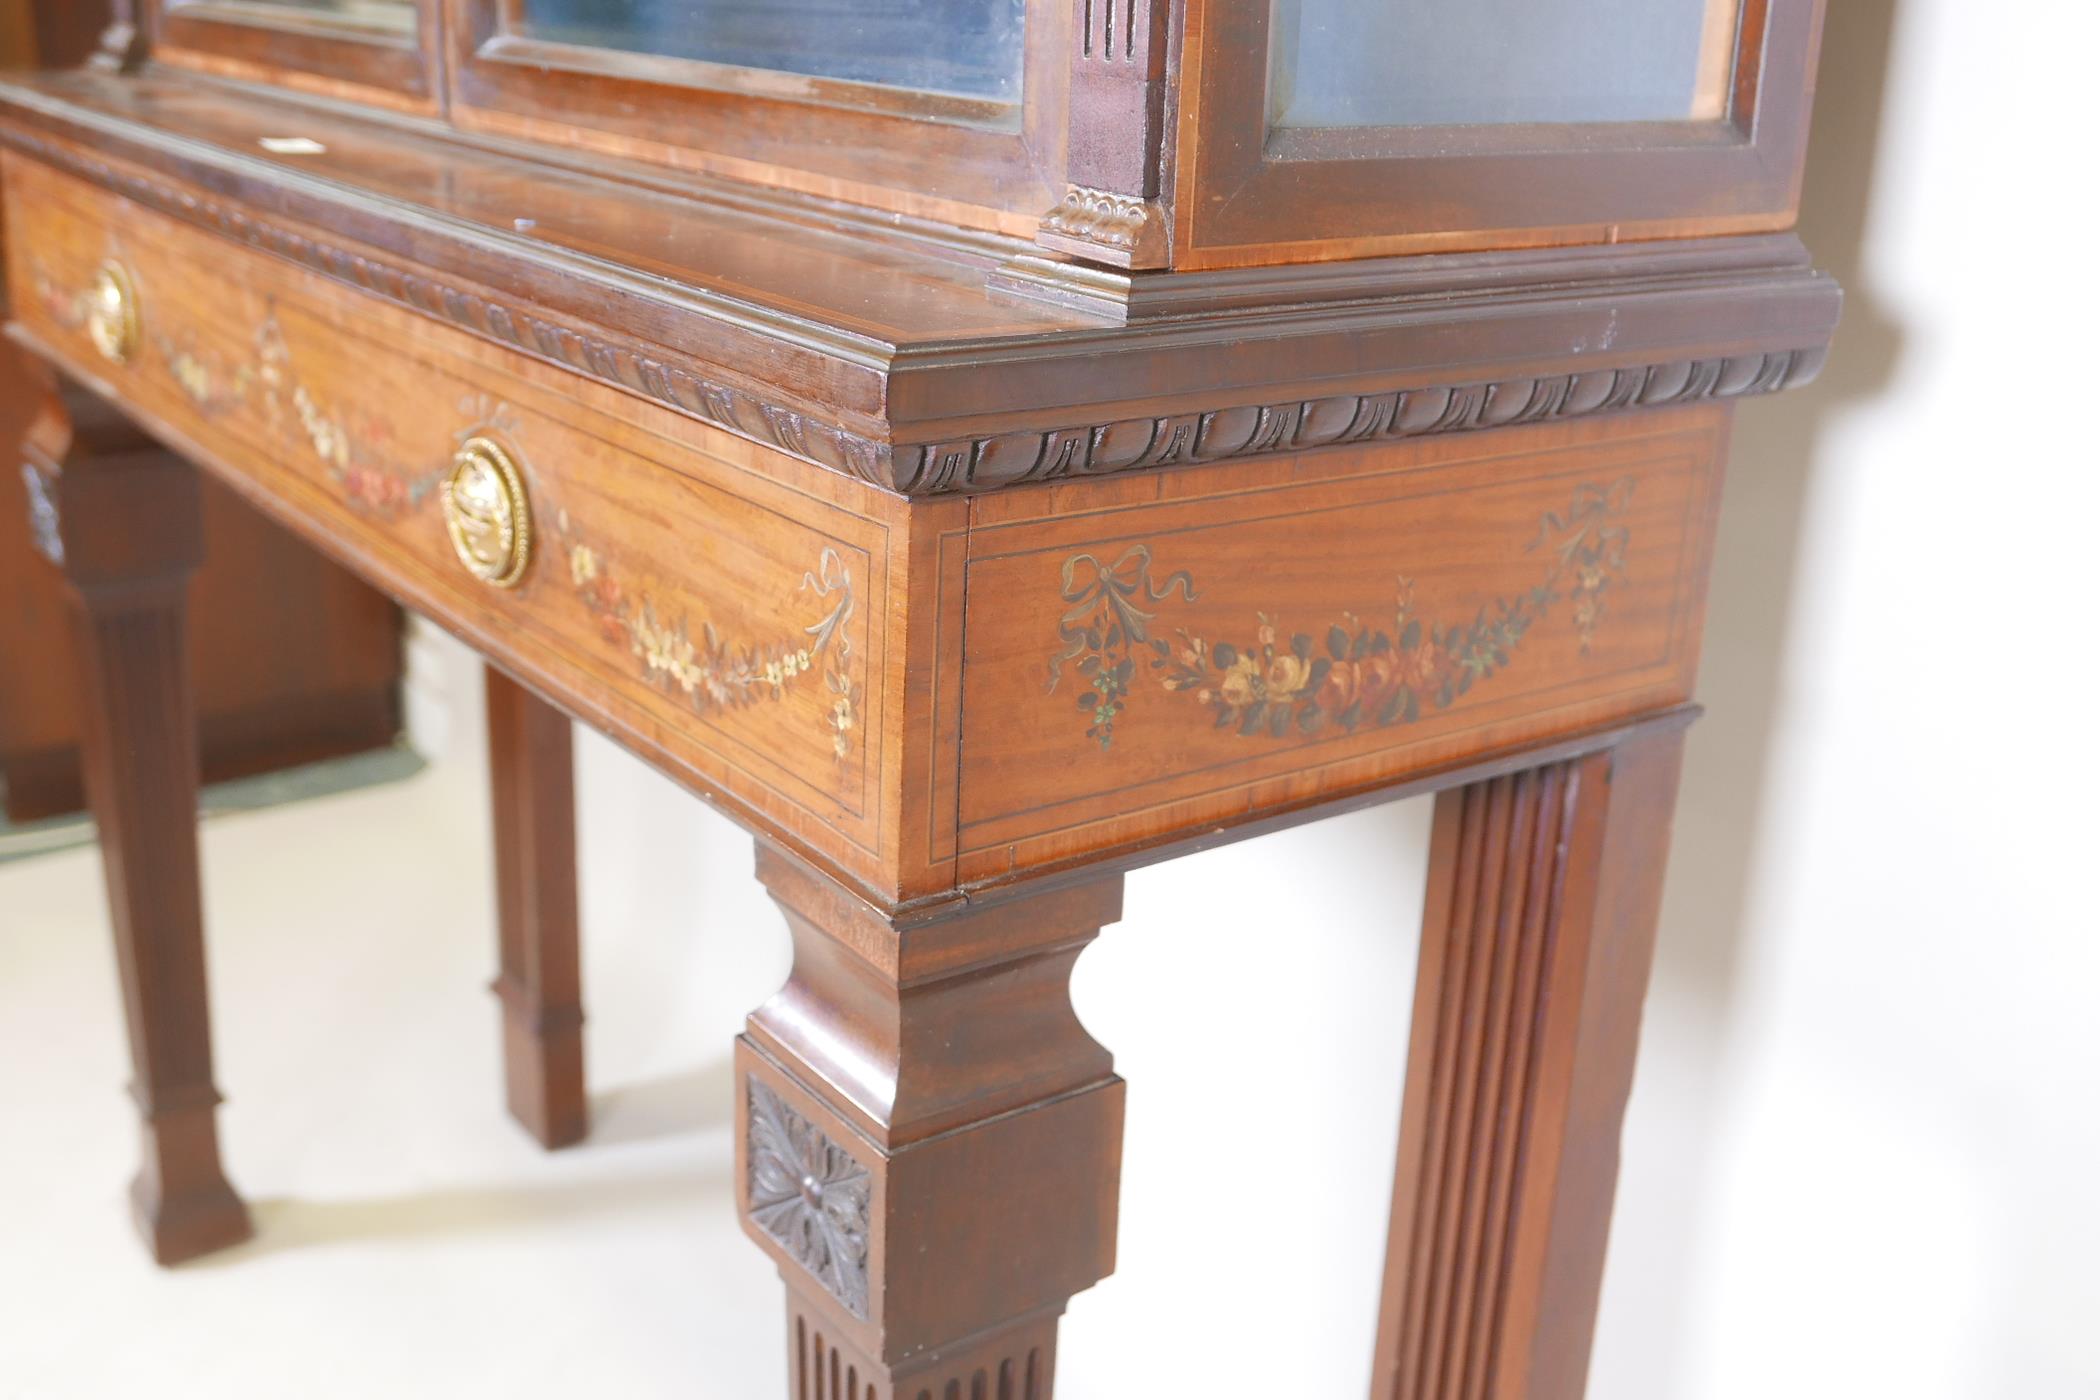 A C19th mahogany two section mahogany display cabinet, with satinwood banded inlay and painted - Image 8 of 8